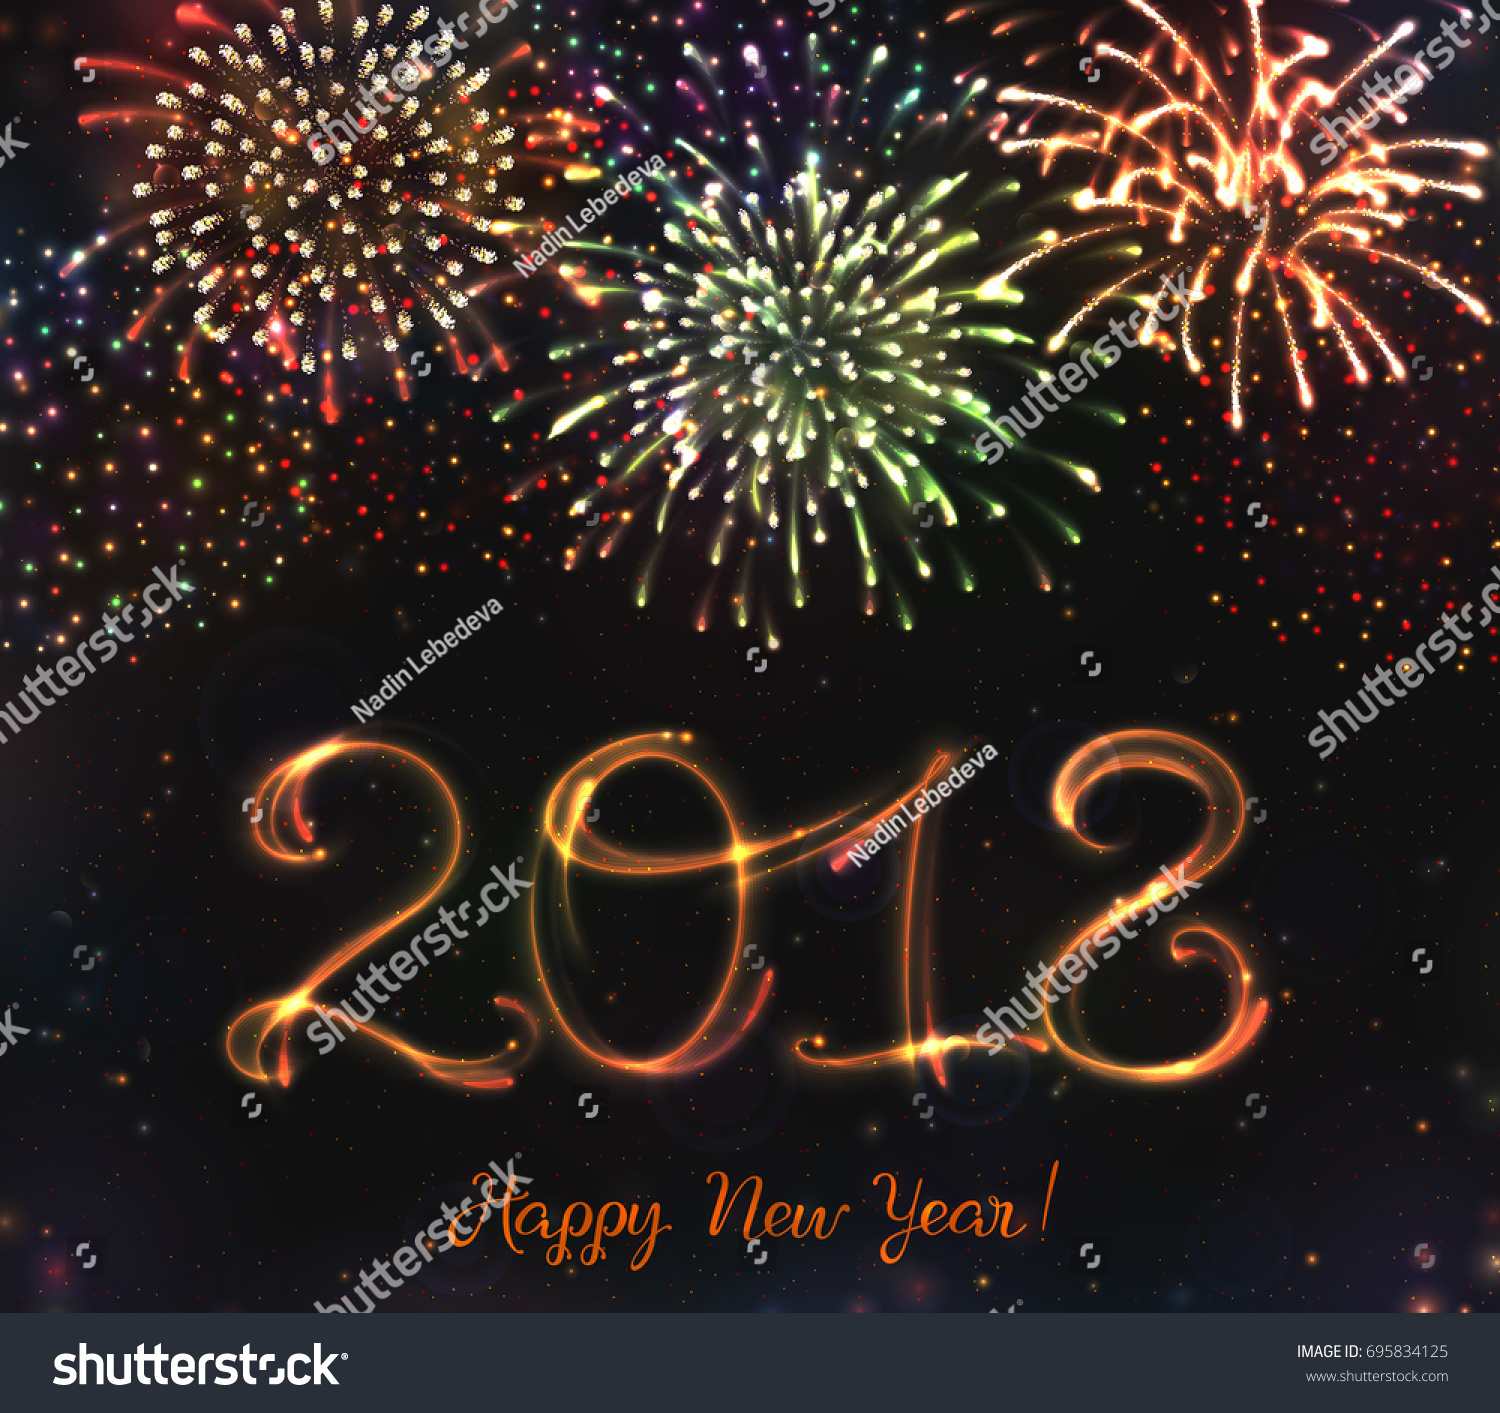 VECTOR eps 10. Glowing collection. 2018 New Year design! Shining Firework light effects isolated and grouped Gold violet white golden fireworks for new year party celebration poster or banner of 2018 #695834125